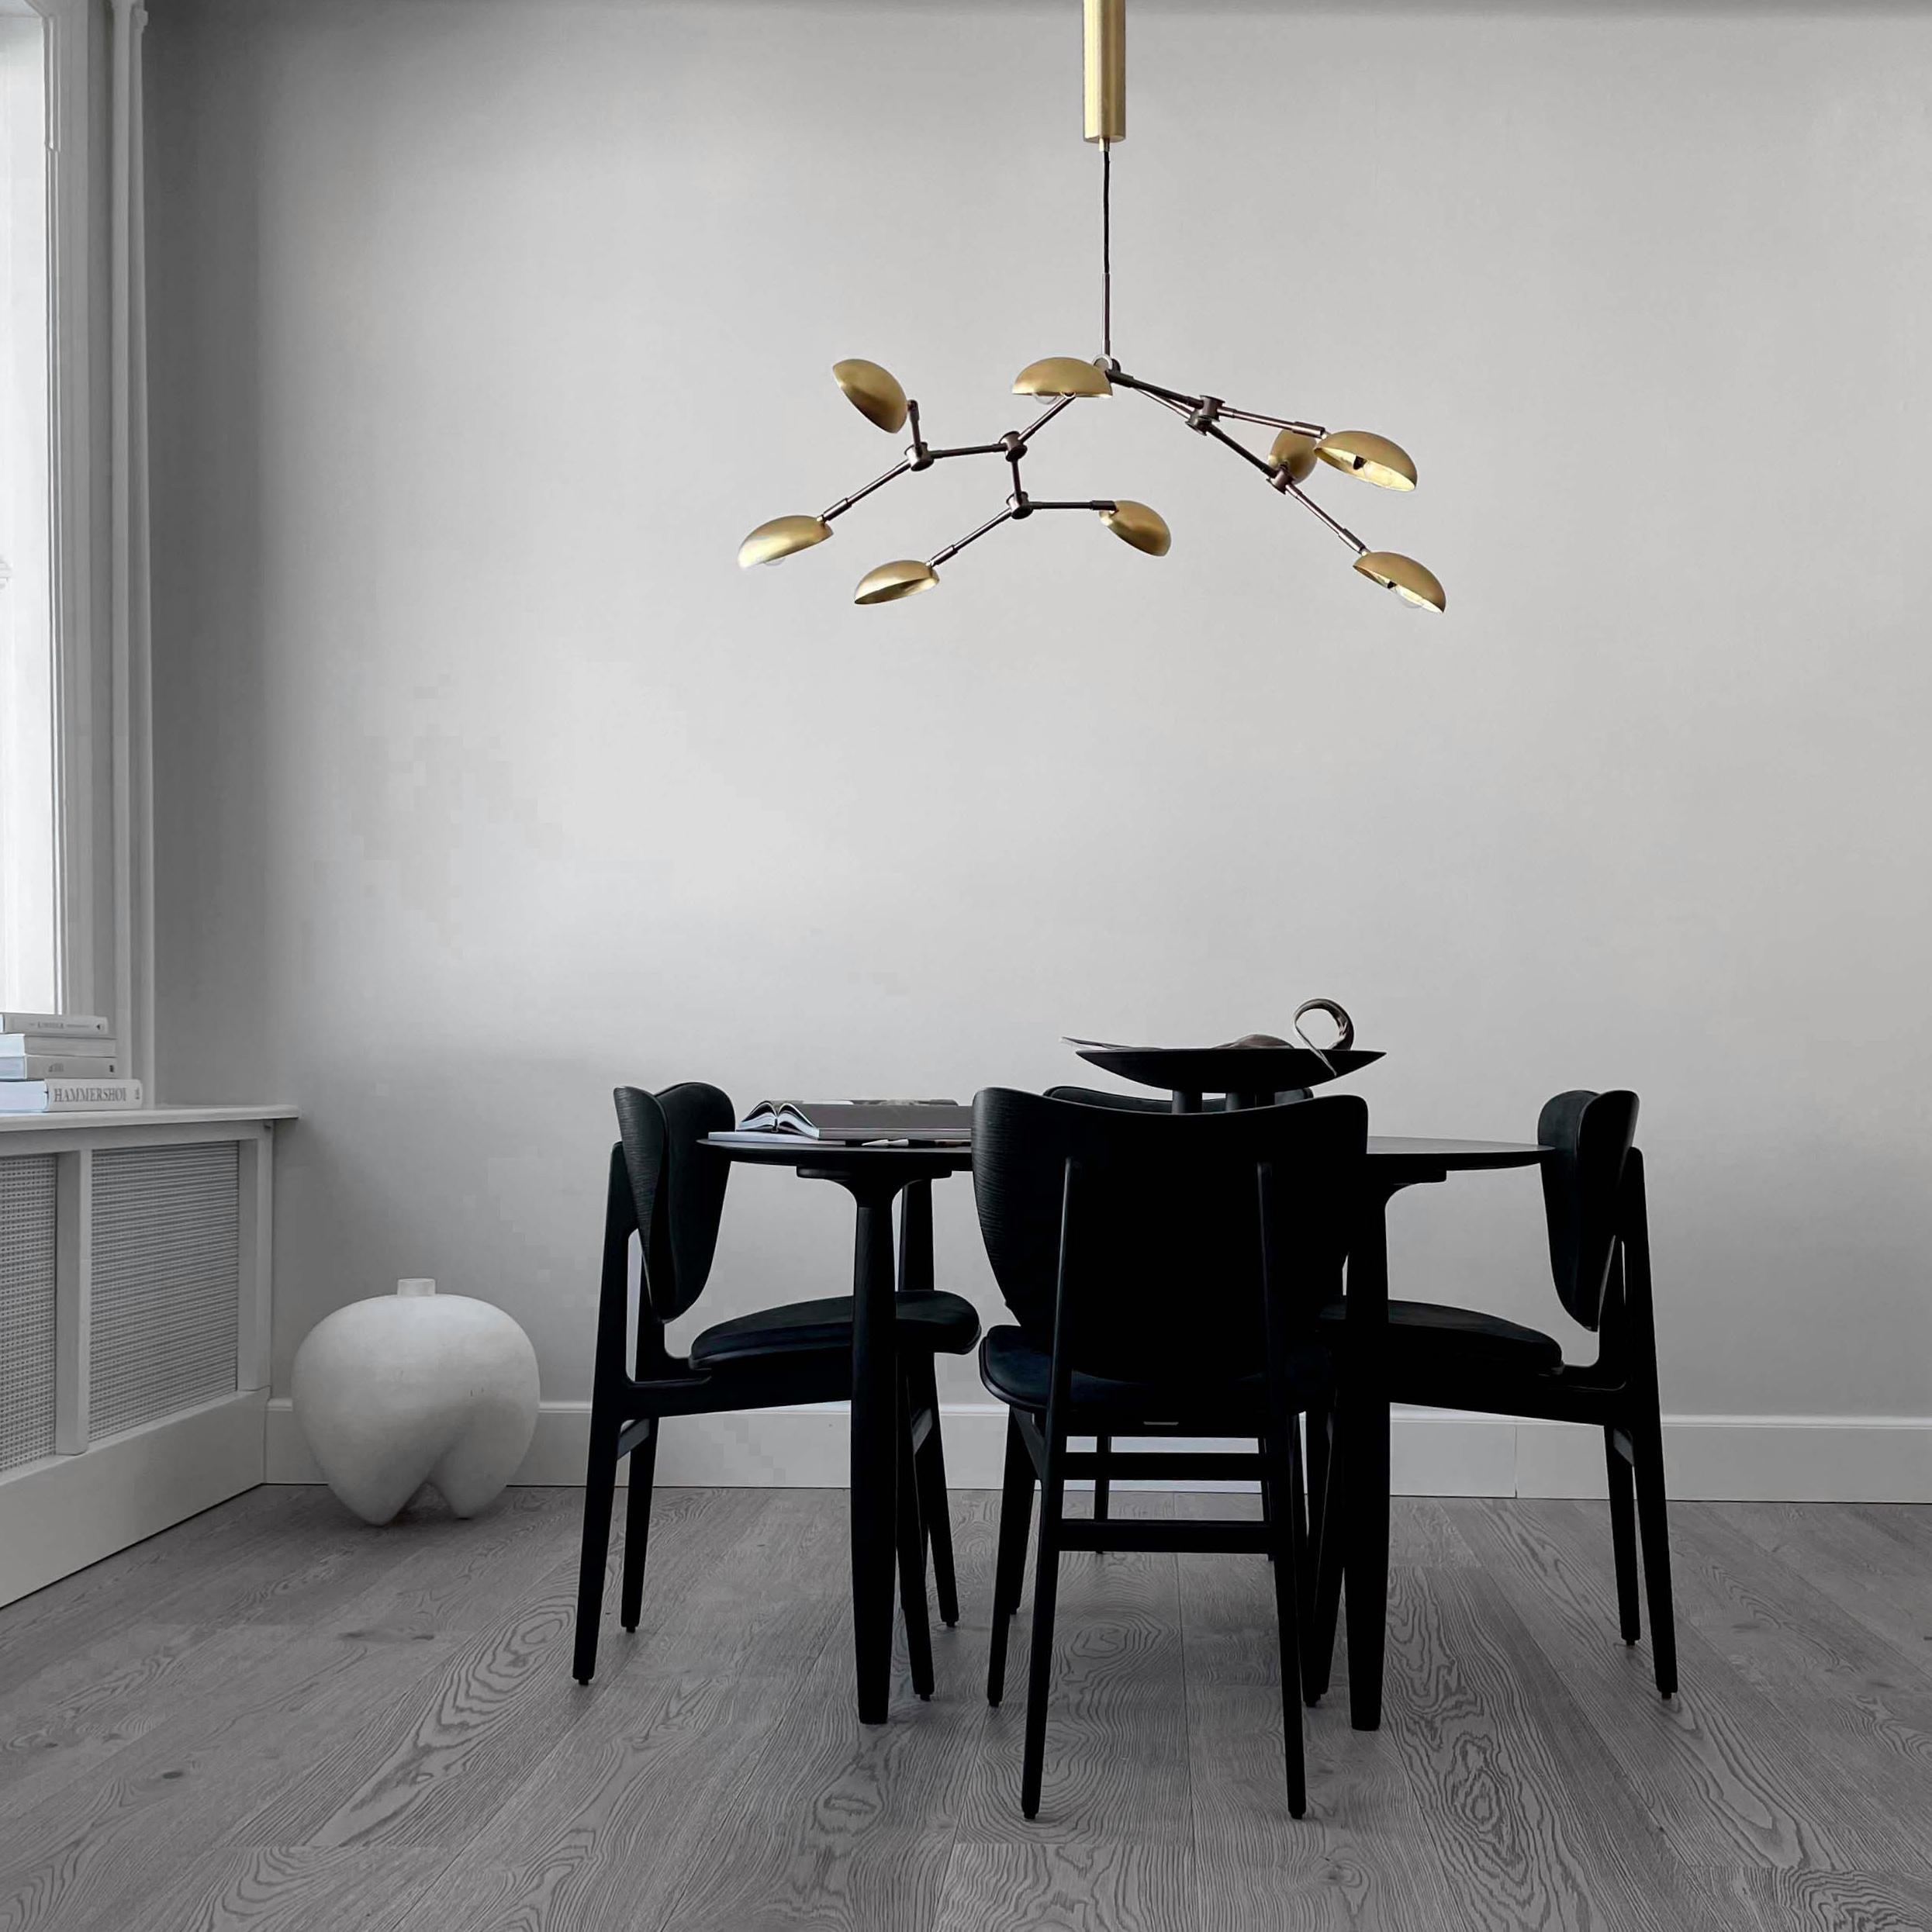 Drop Chandelier Oxidized Metal by 101 Copenhagen
Designed by Kristian Sofus Hansen & Tommy Hyldahl.
Dimensions: L155 x W91 x H21 cm
Materials: Lampshade: Oxidized Aluminium
Pipes: Brass Oxidized / Unpolished
Cable: Fabric covered cable /